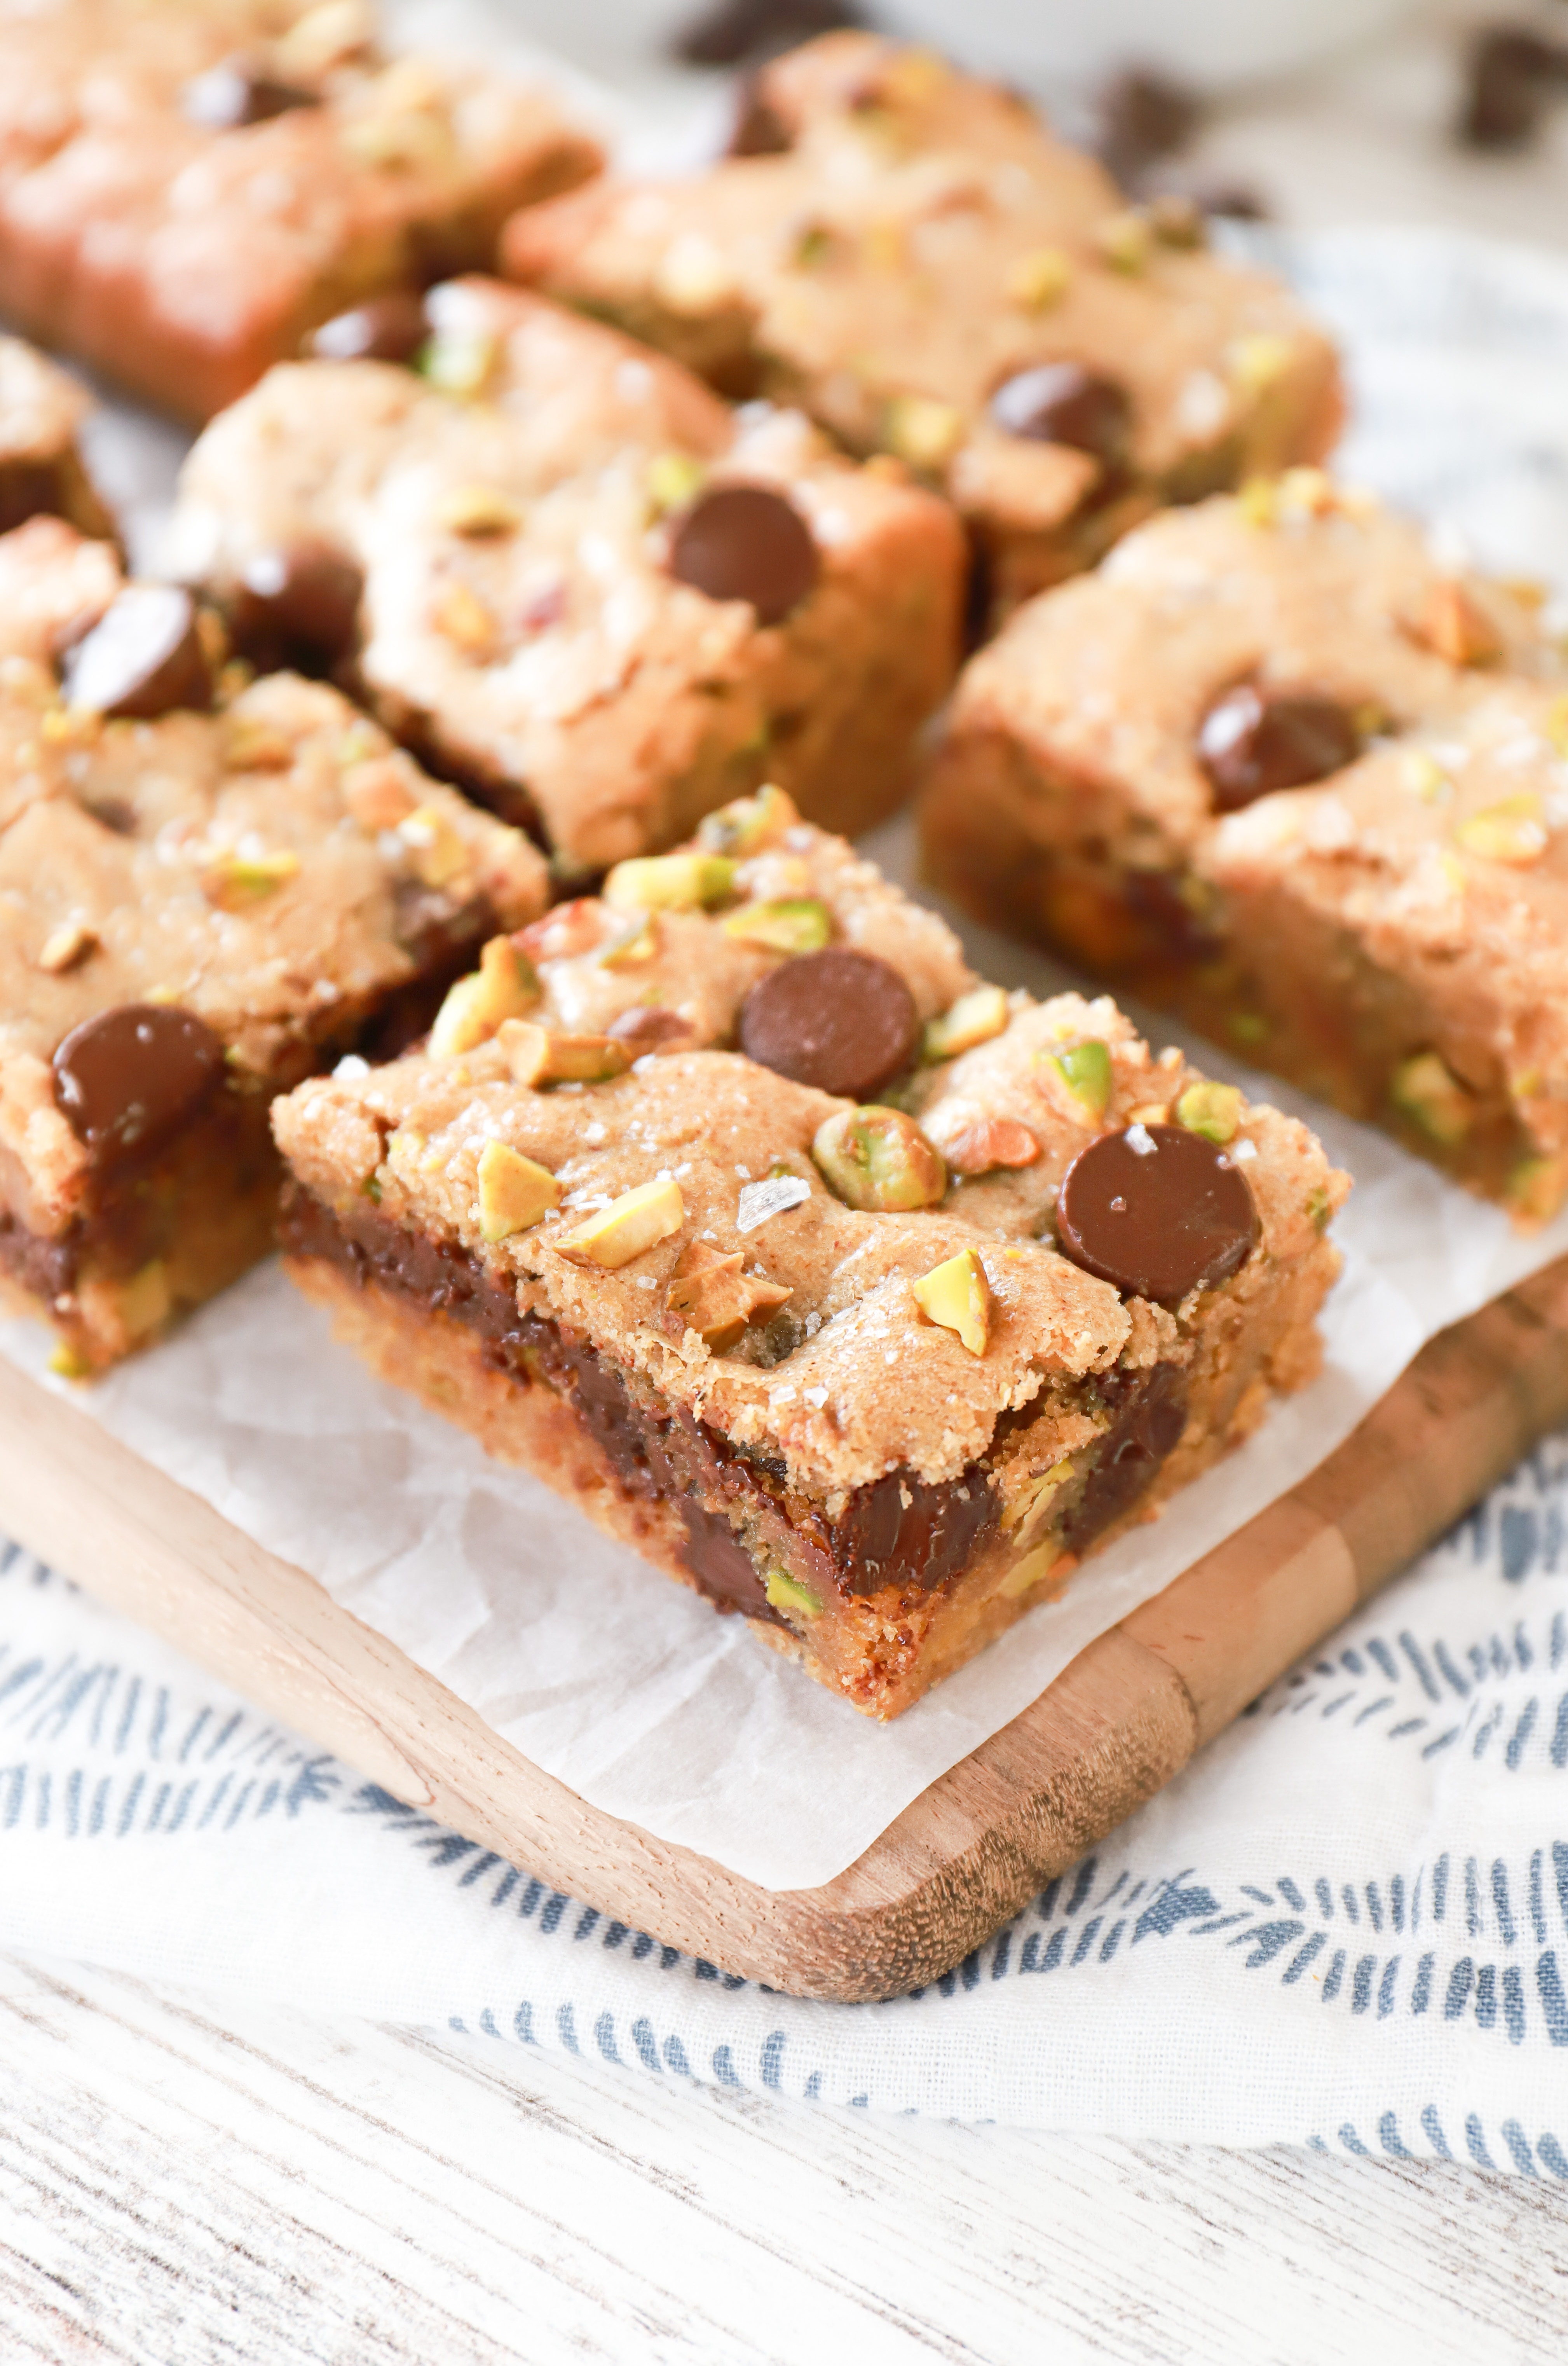 Salted dark chocolate pistachio cookie bars on a parchment paper covered wood cutting board.